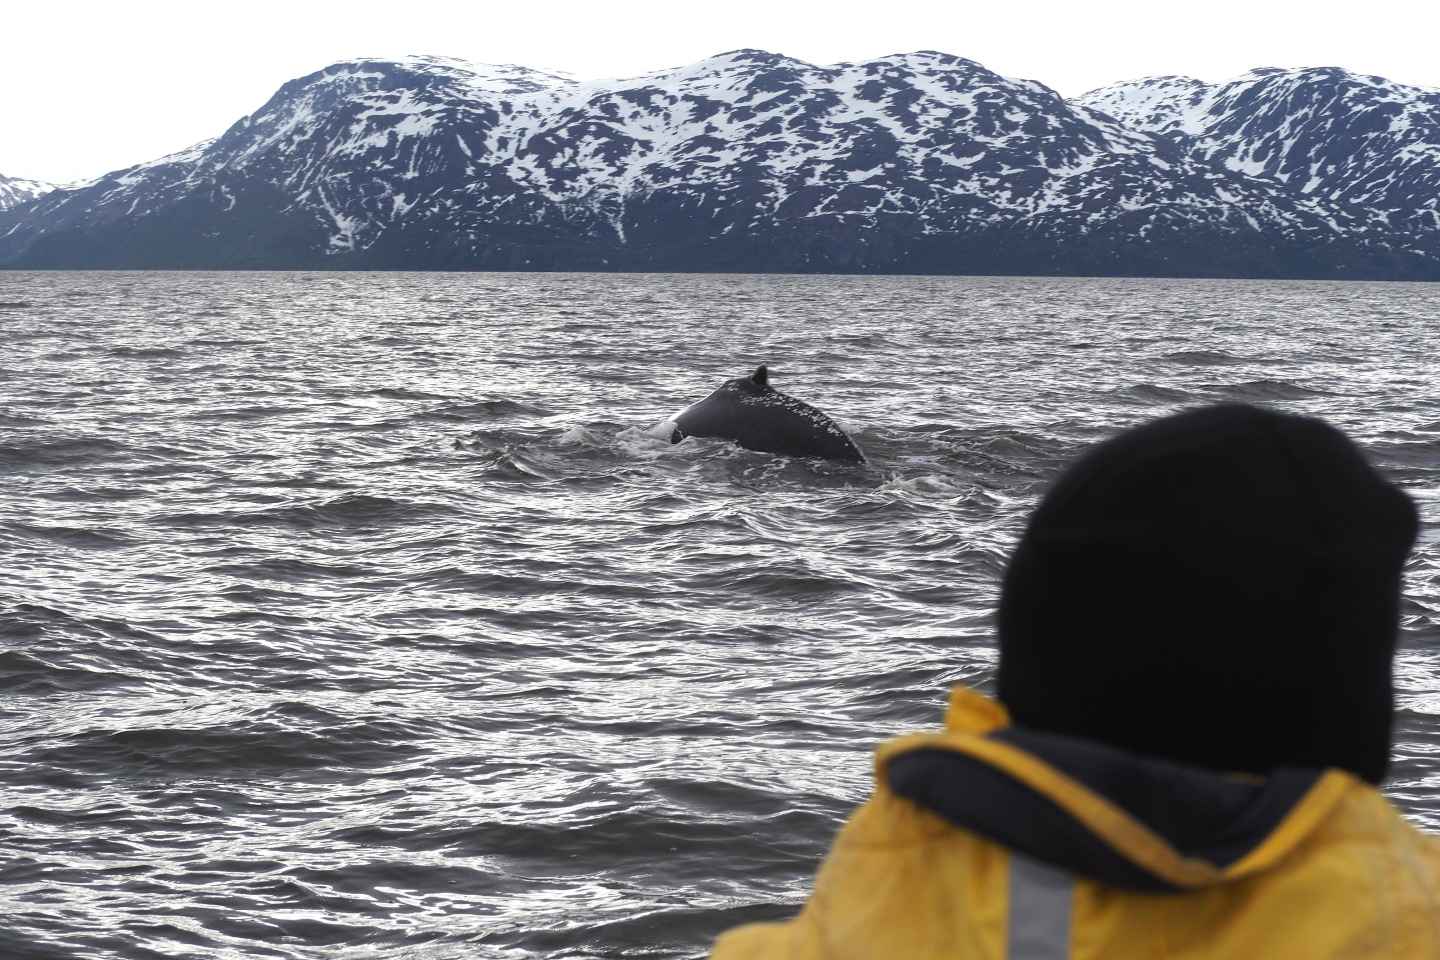 From Alta: Whale watching experience